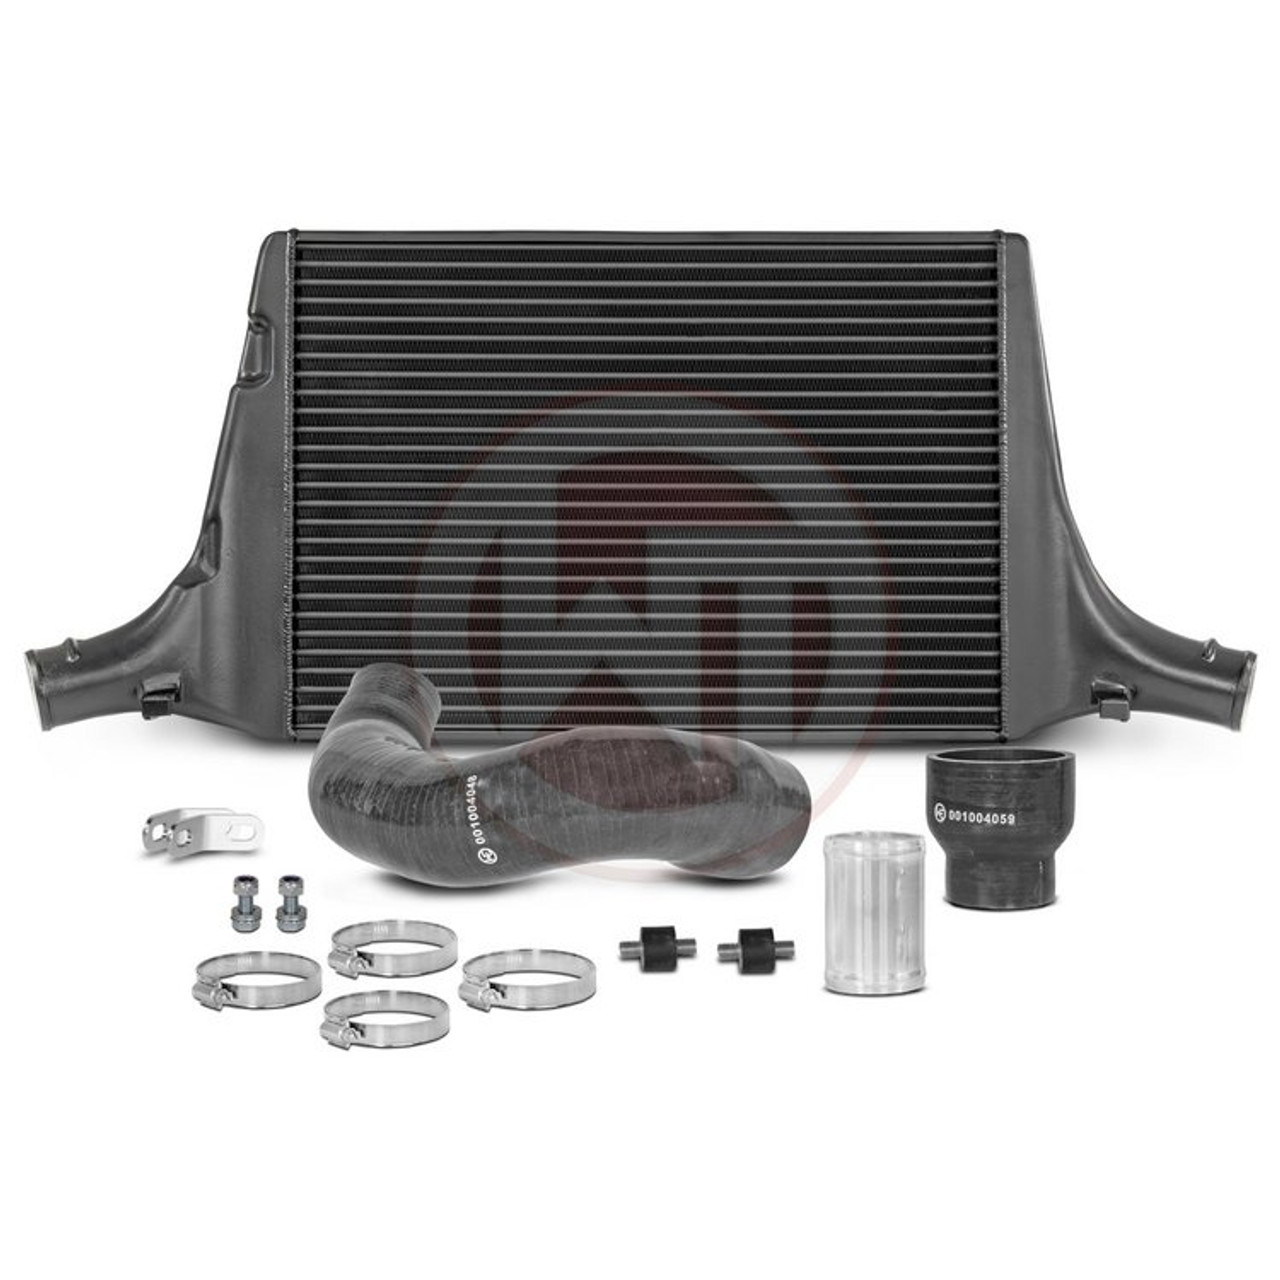 Wagner Tuning Competition Intercooler Kit for B8.5 A4 & A5 2.0T